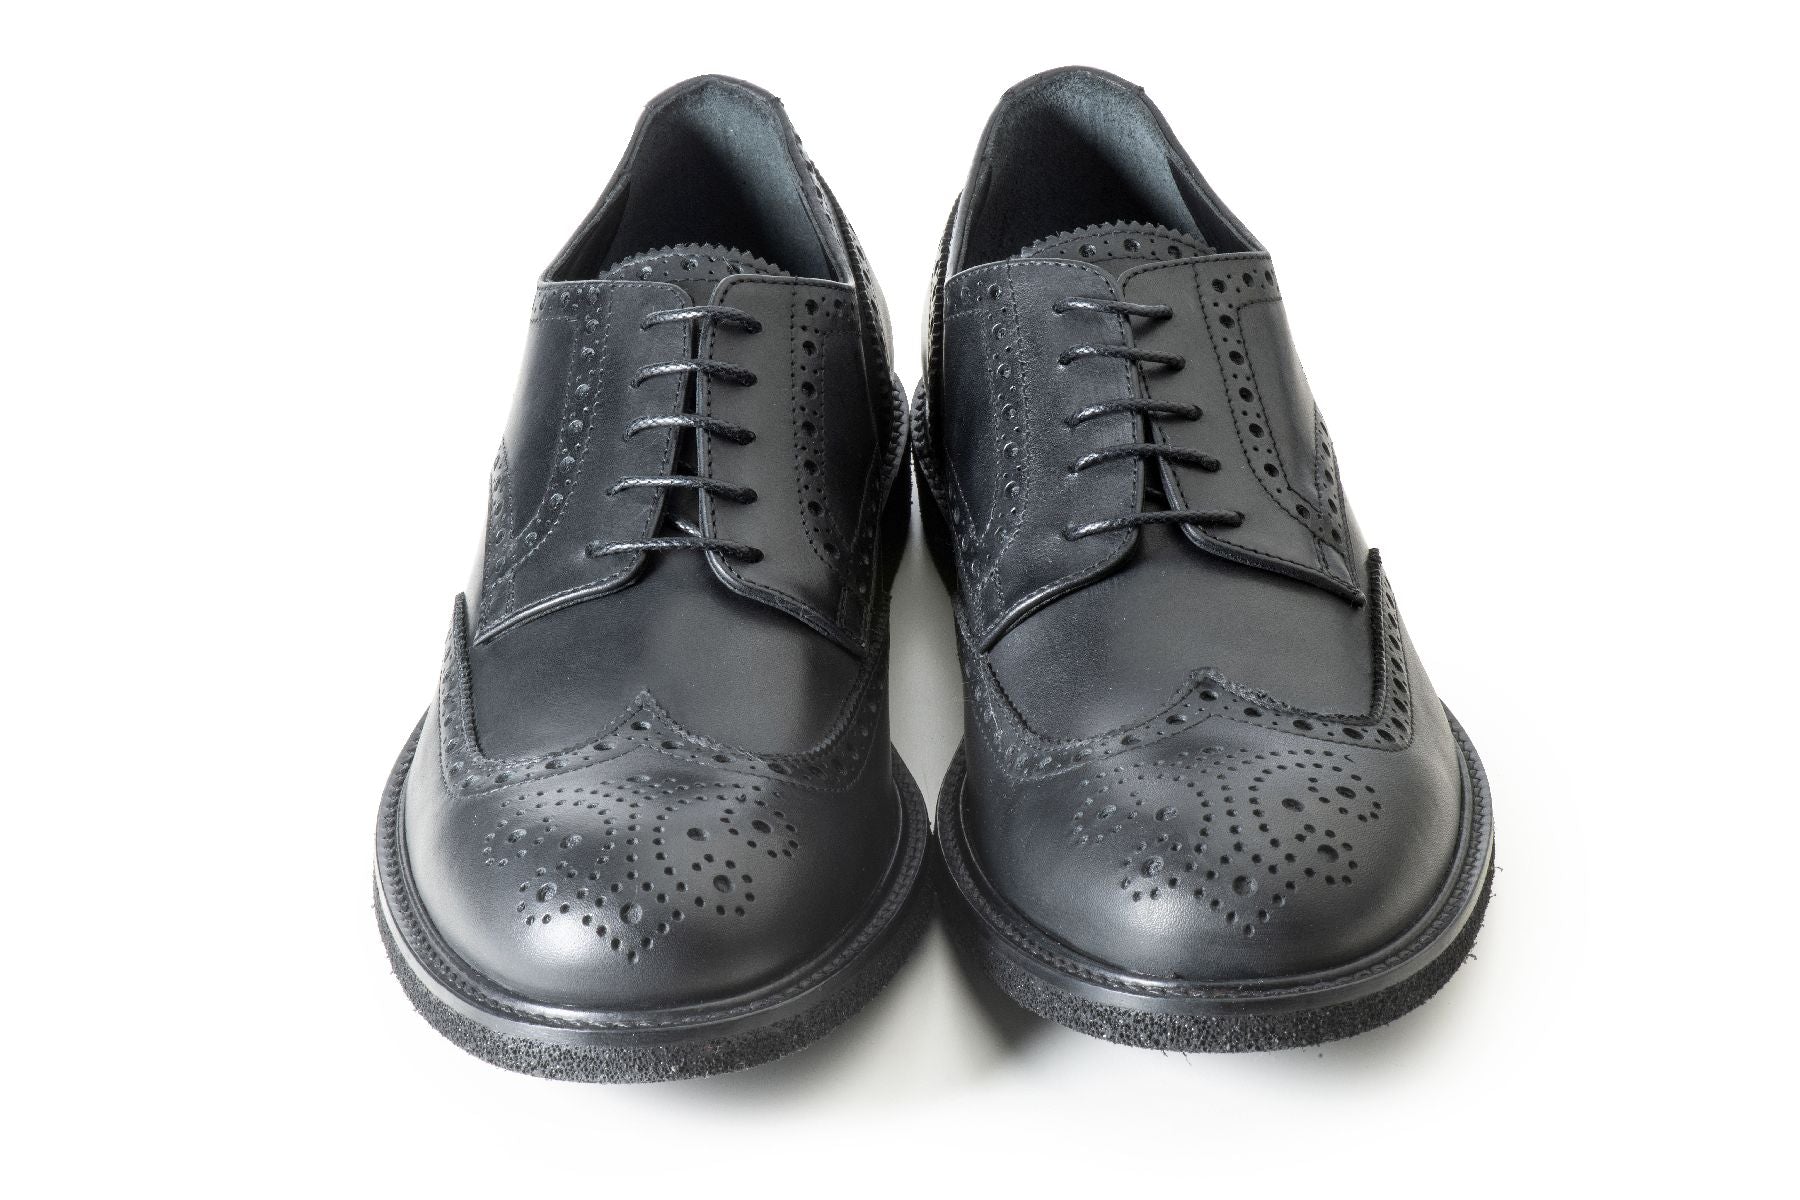 Oxford casual English shoes